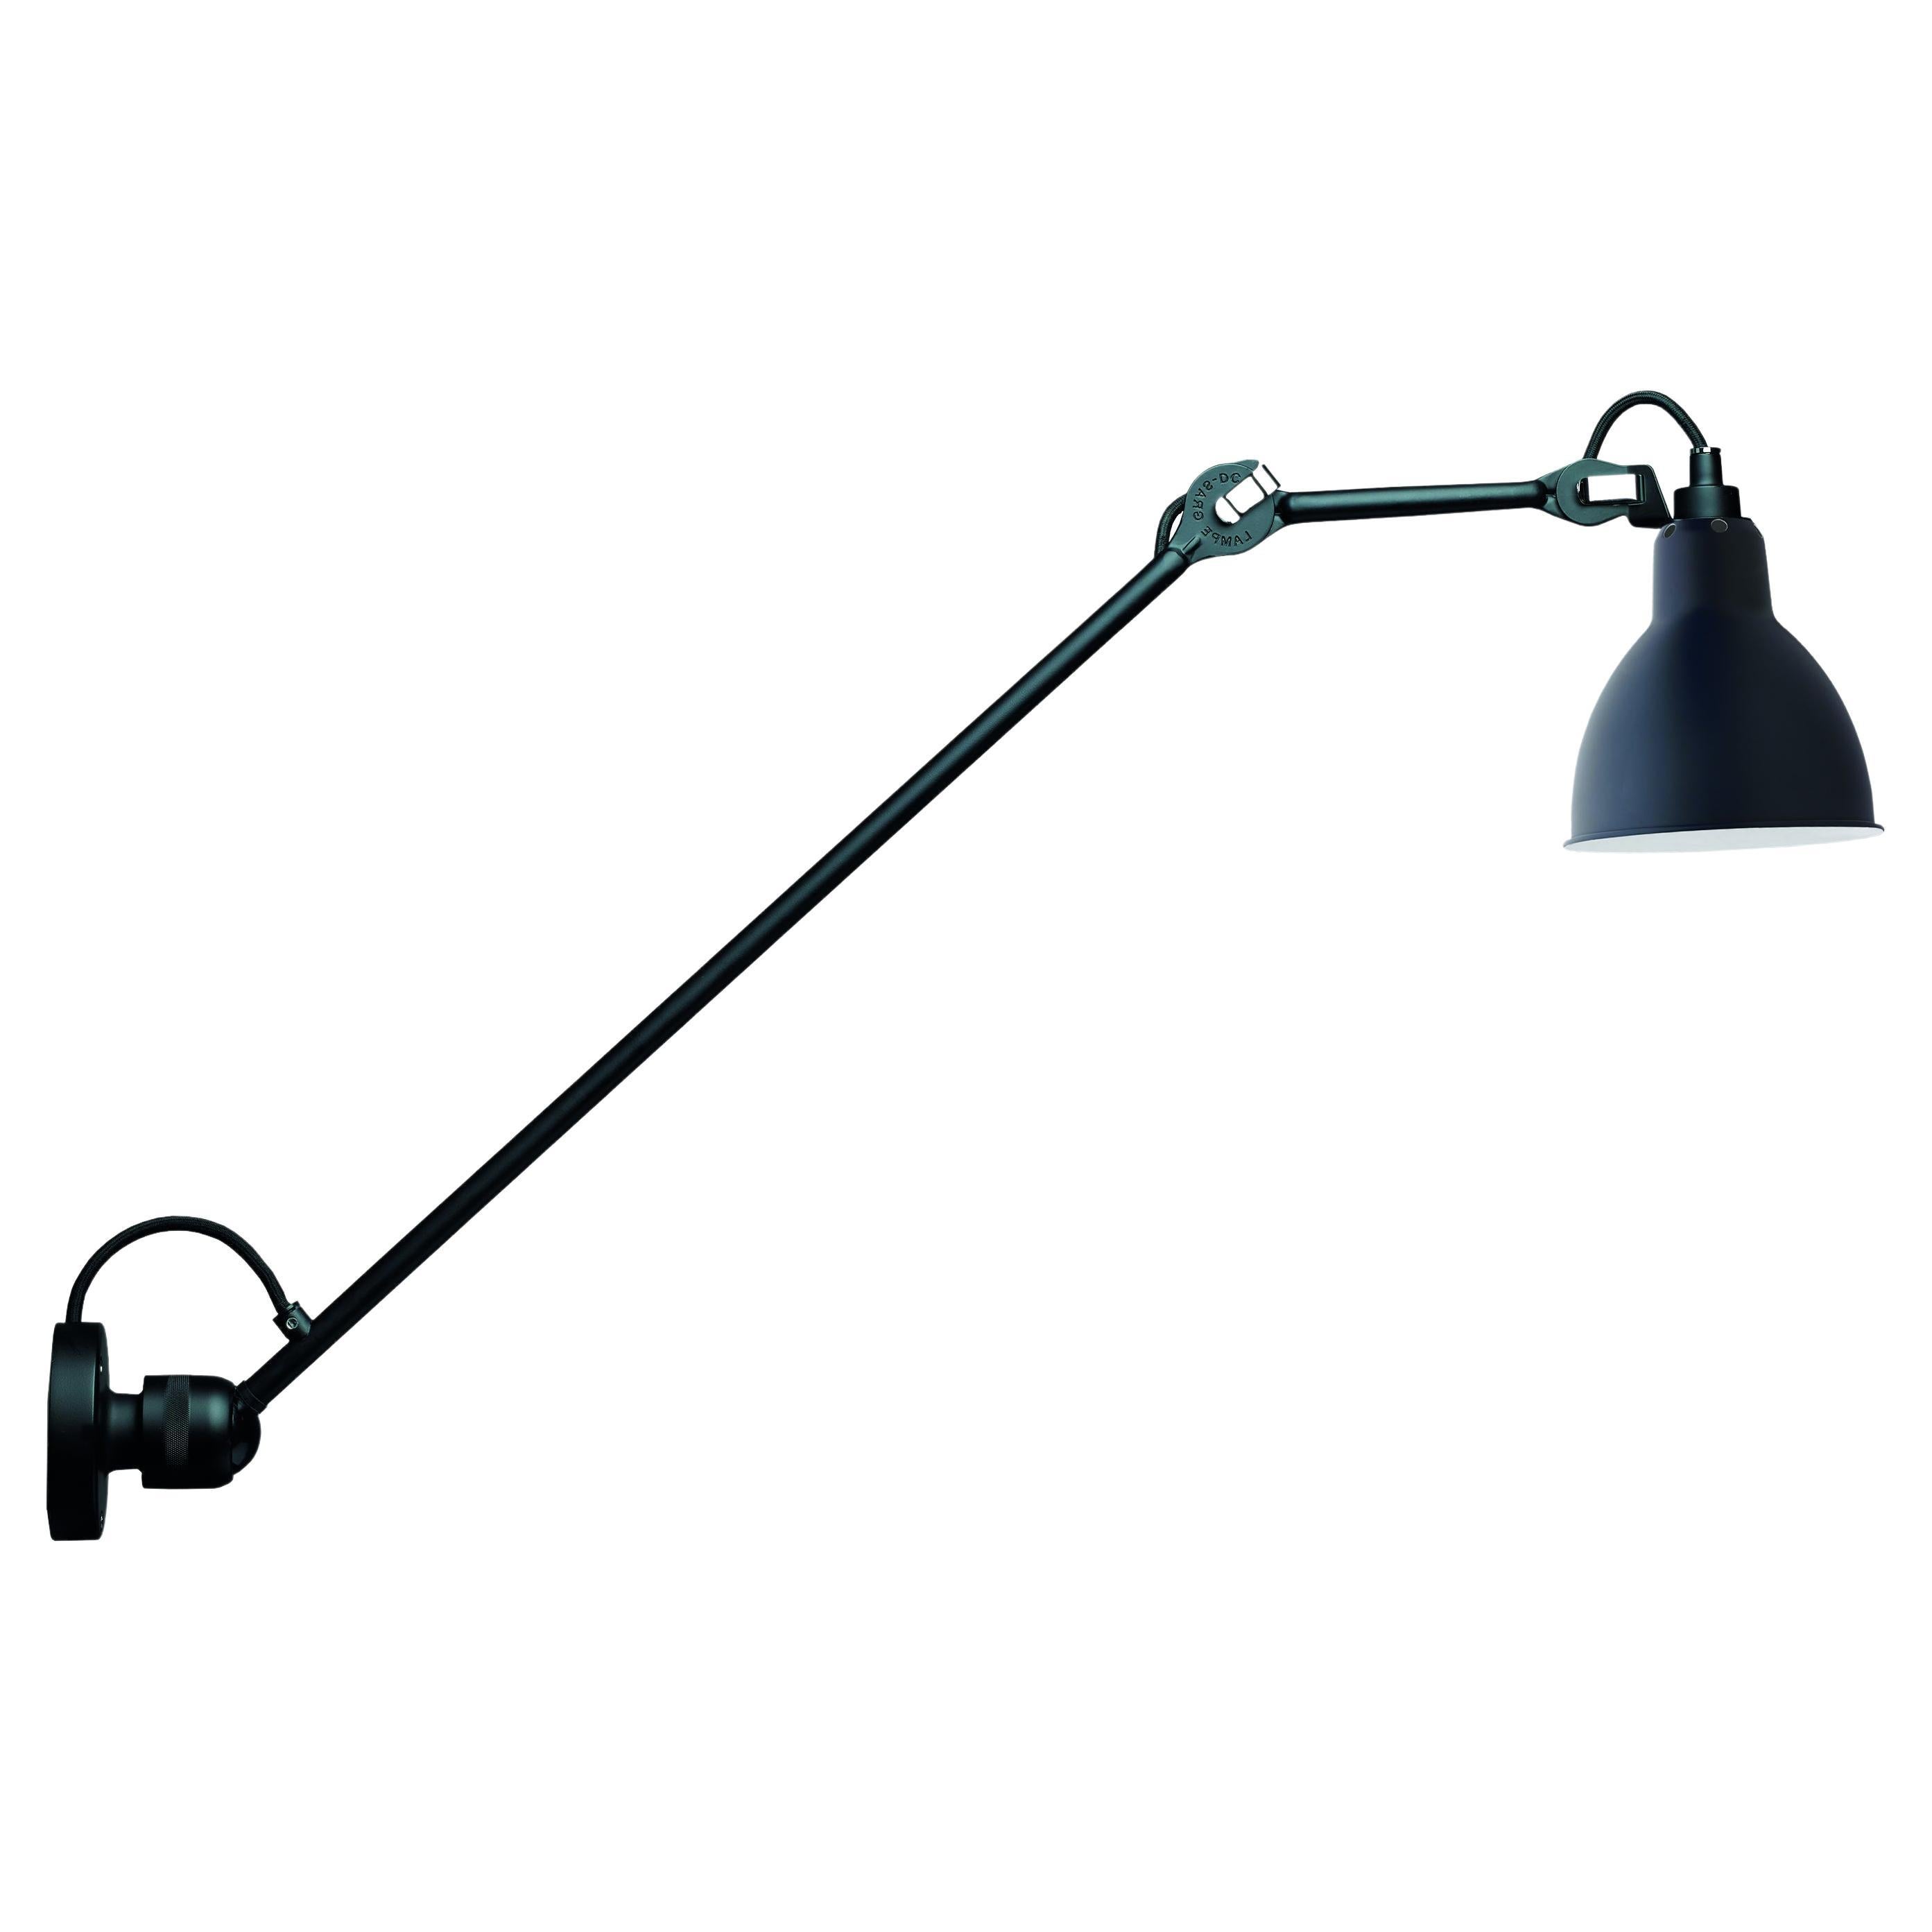 DCW Editions La Lampe Gras N°304 L60 Wall Lamp in Black Arm and Blue Shade For Sale